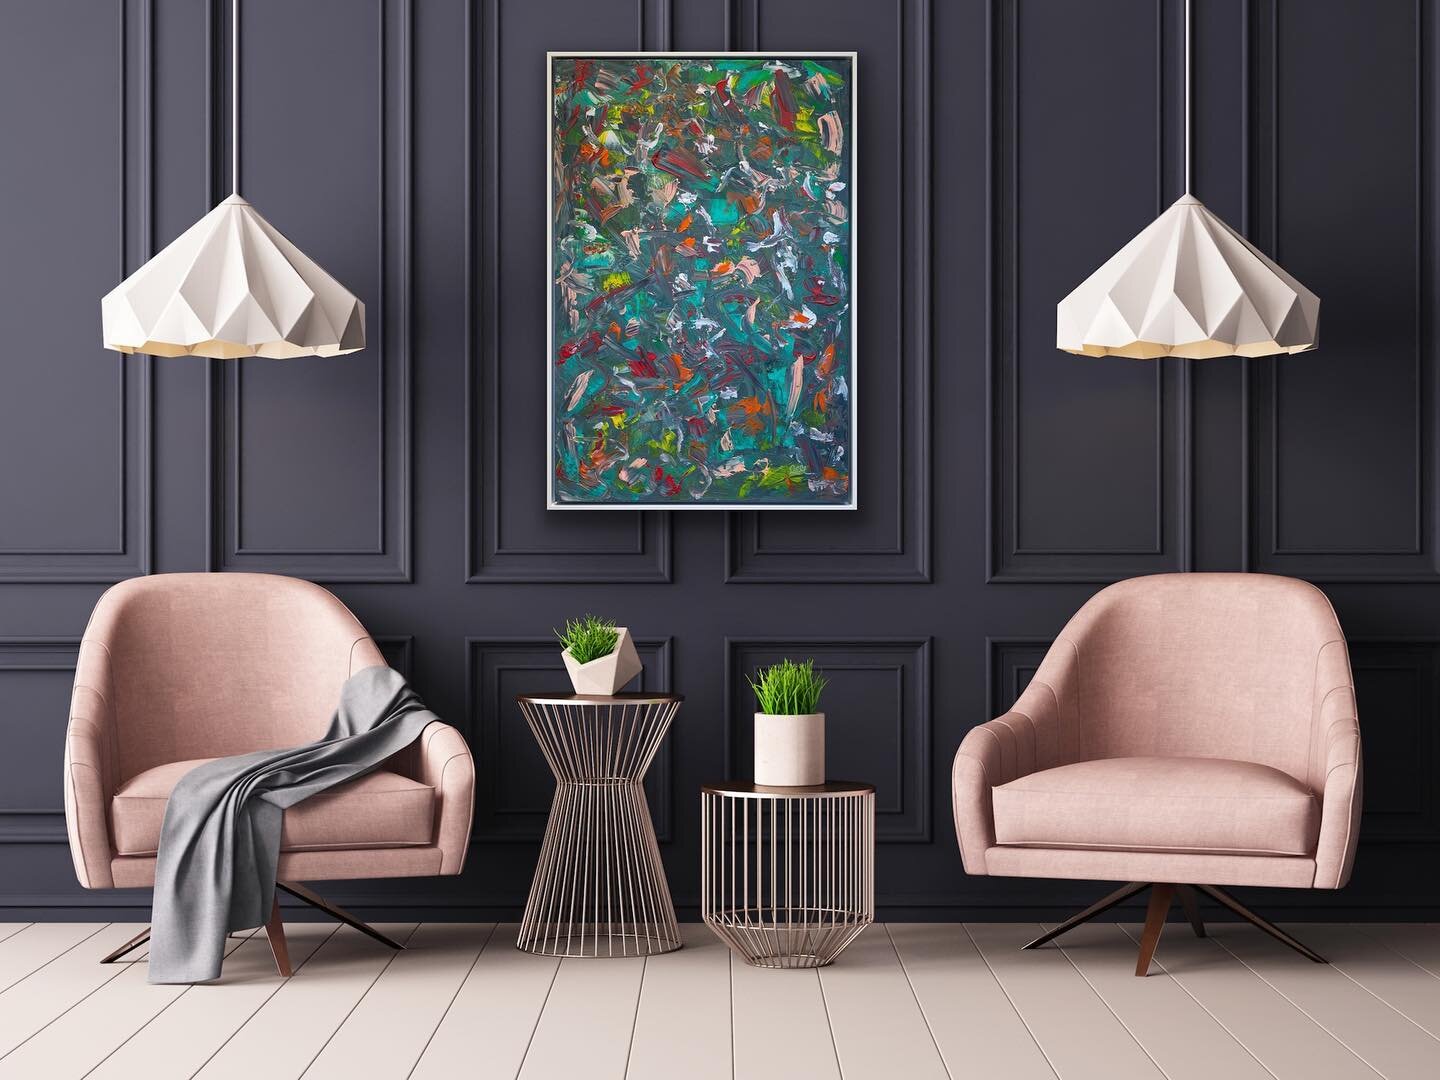 Art is so personal to both the artist and the collector. Purchase what speaks to you. Move your painting around until you find it&rsquo;s perfect space. It&rsquo;s amazing how different lighting, furniture, and wall colors can bring a piece to life. 